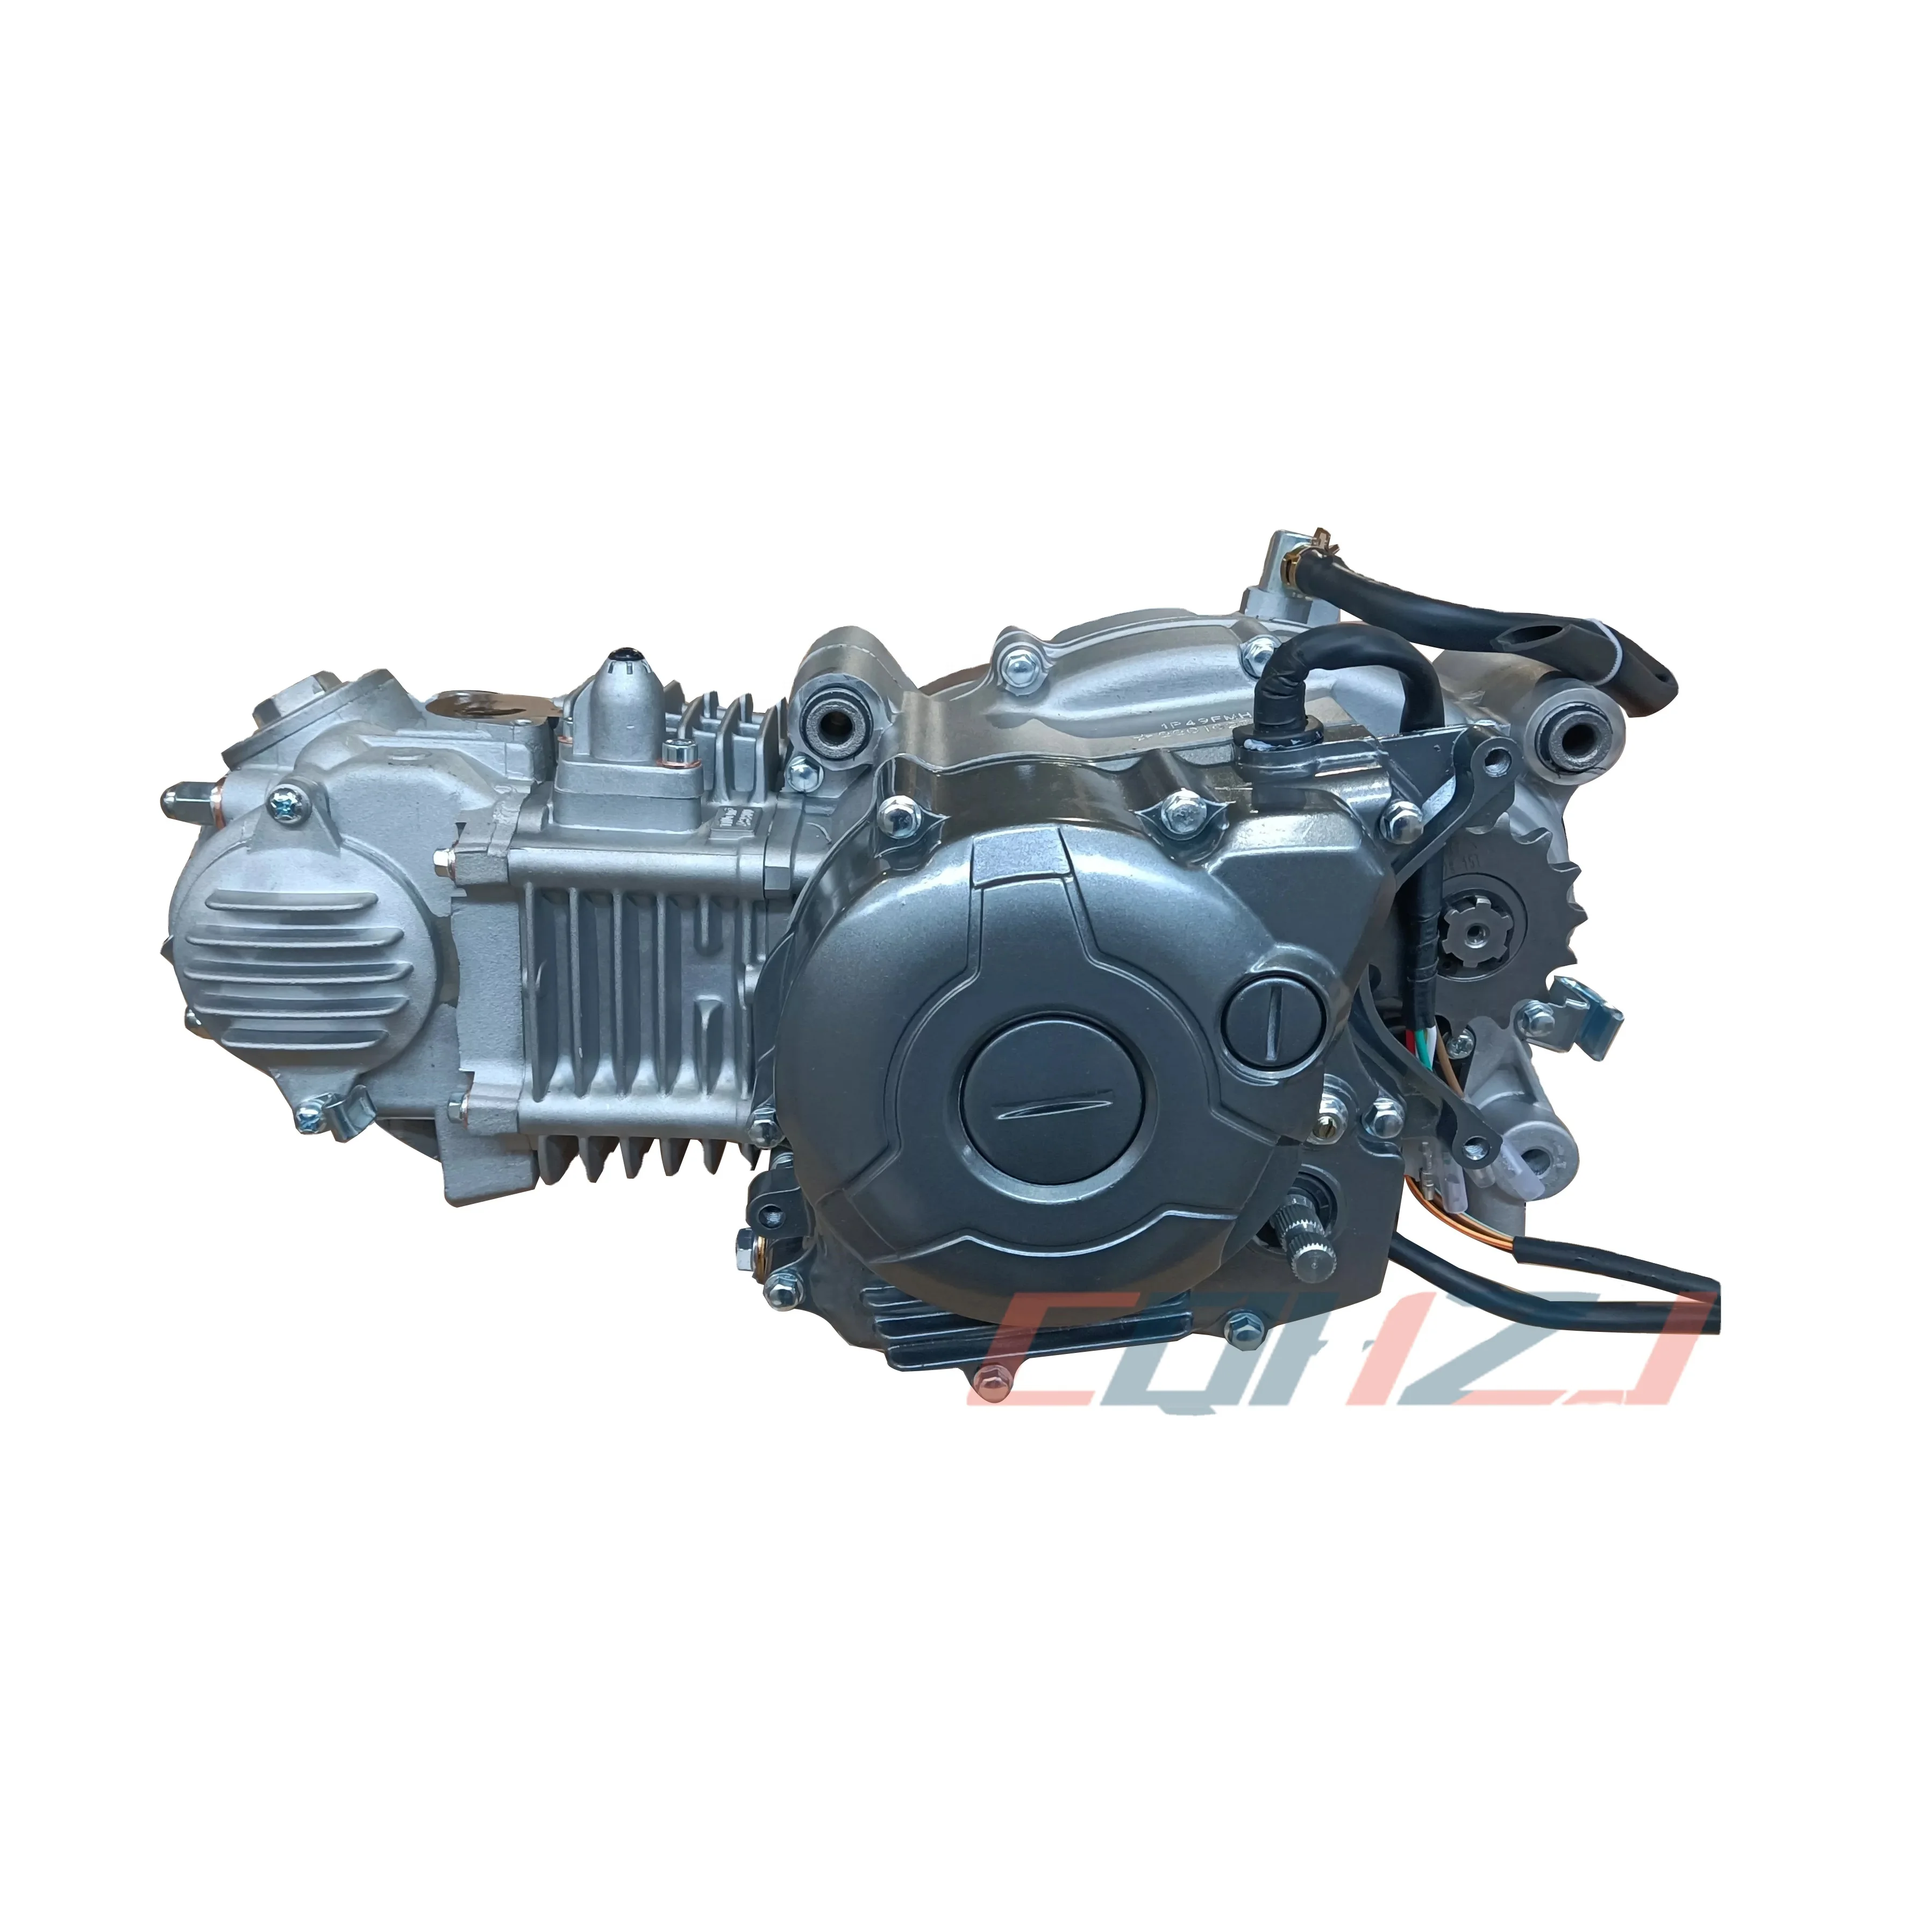 CQHZJ Factory Direct Sale Motorcycle Engines Assembly JY110 YB110 YBR125 YBR150 Air-Cooled Engine factory direct sale motorcycle engine assembly 4 stroke machinery engines